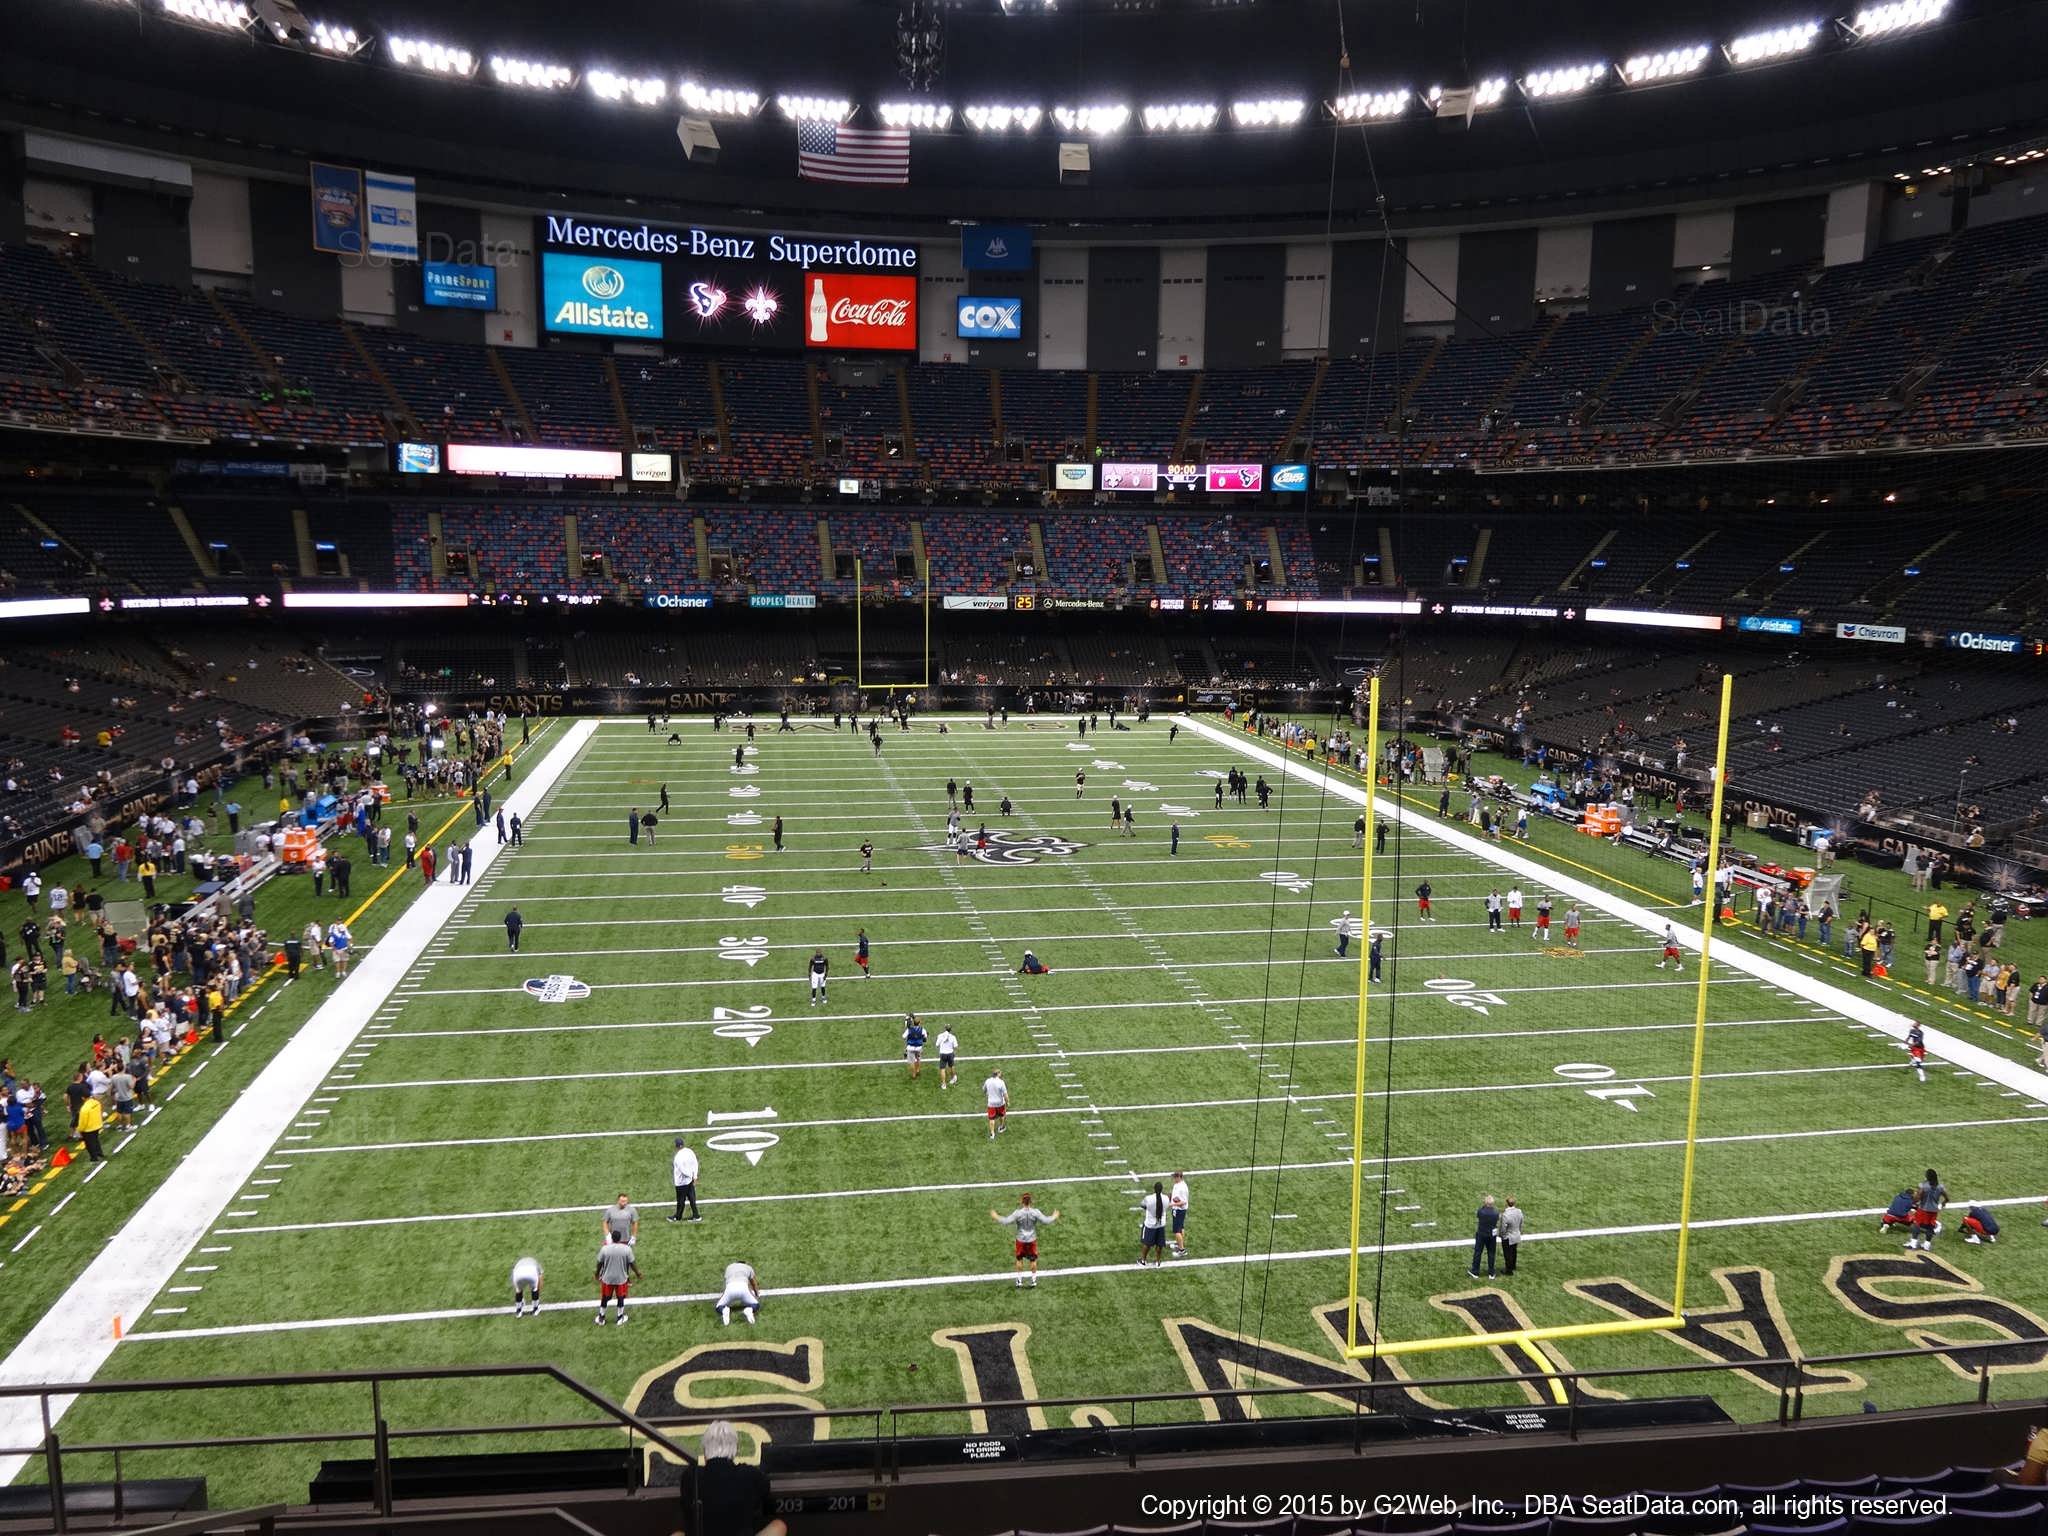 Seat view from section 301 at the Mercedes-Benz Superdome, home of the New Orleans Saints